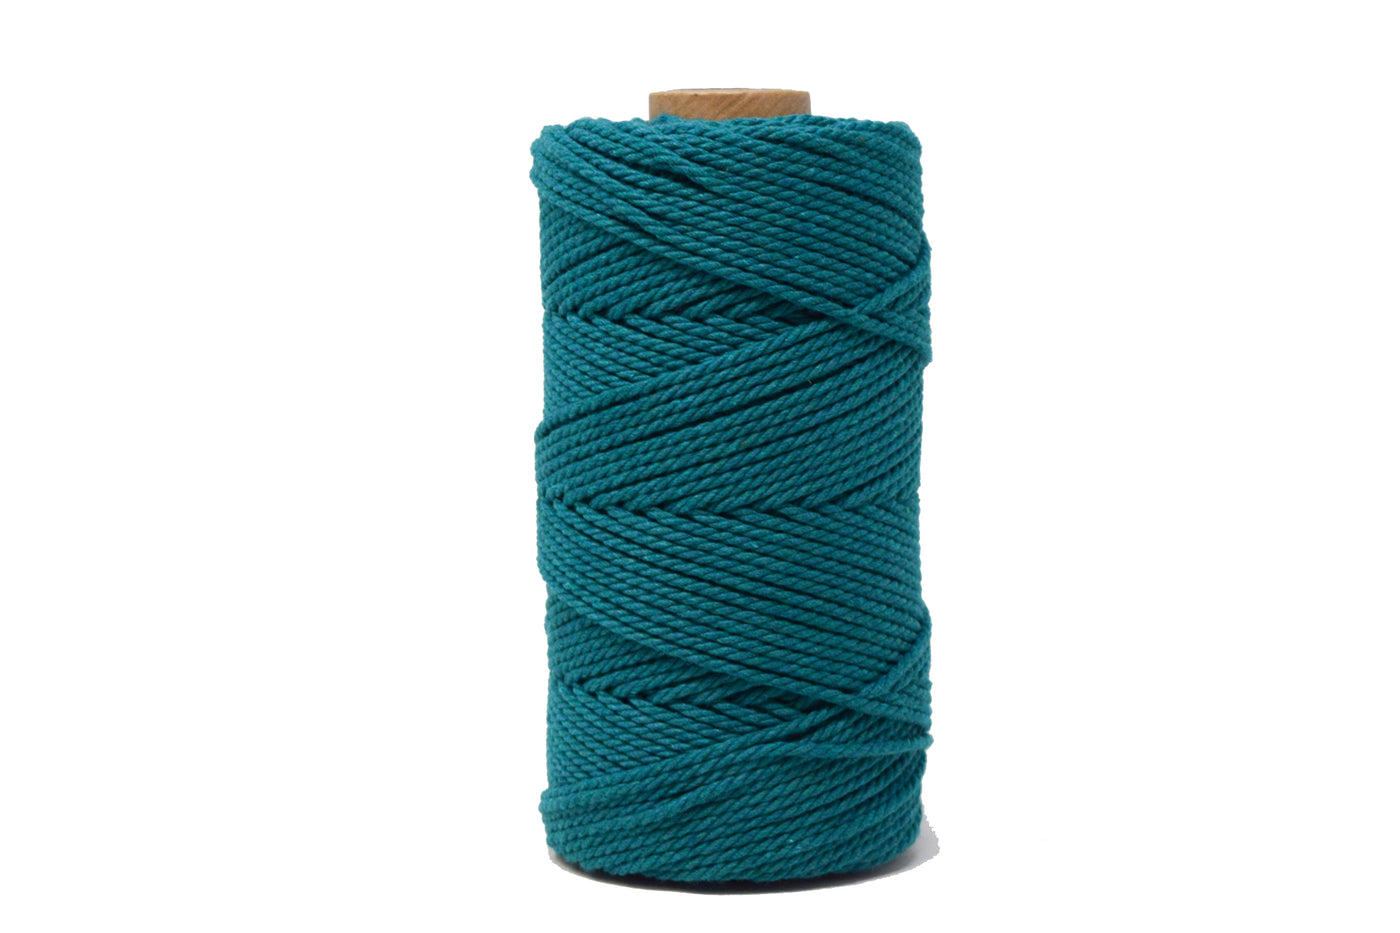 COTTON ROPE ZERO WASTE 2 MM - 3 PLY - TEAL COLOR